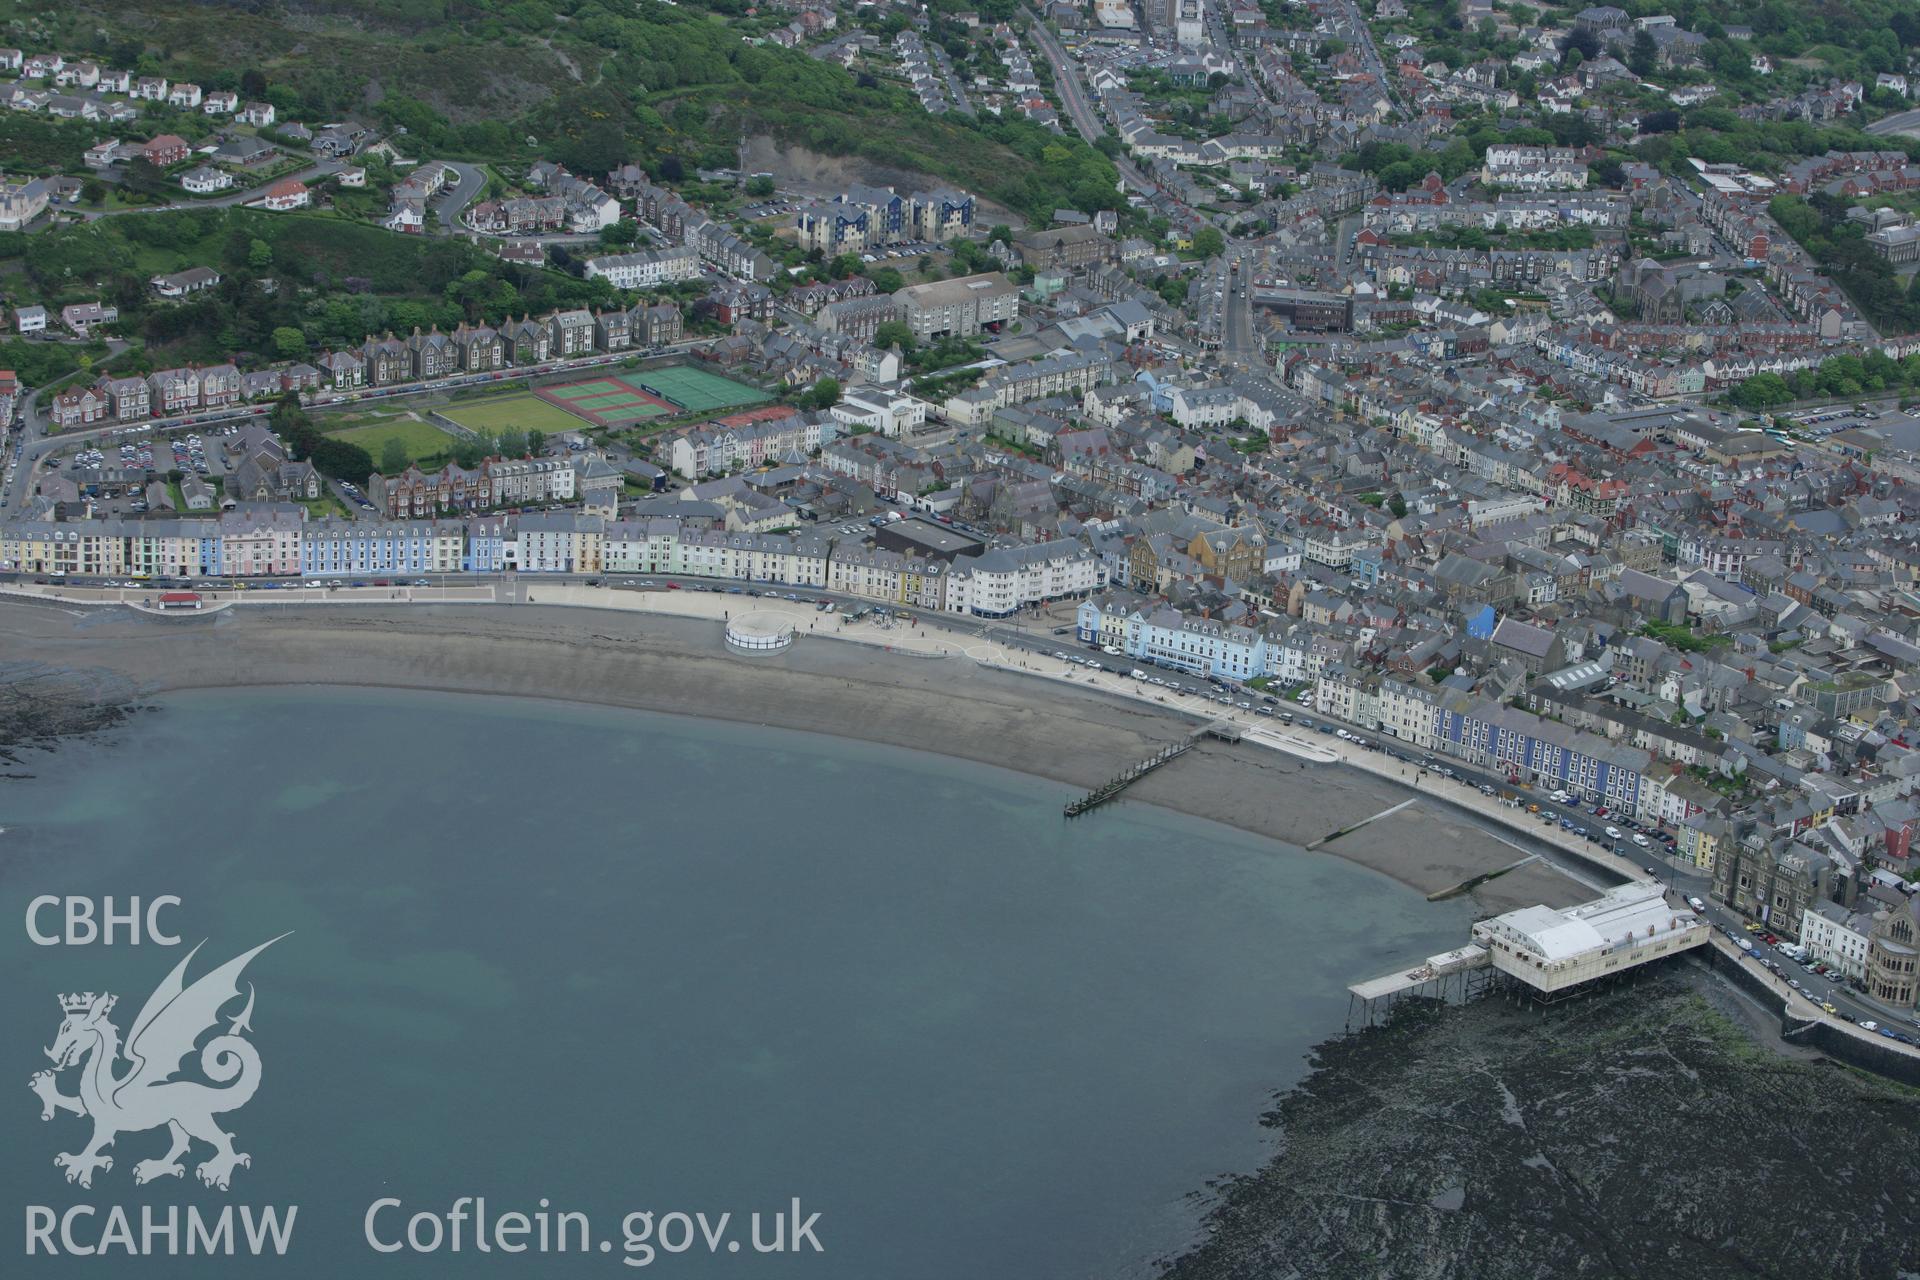 RCAHMW colour oblique photograph of Aberystwyth town, with the Royal Pier and Pavillion. Taken by Toby Driver on 20/05/2008.